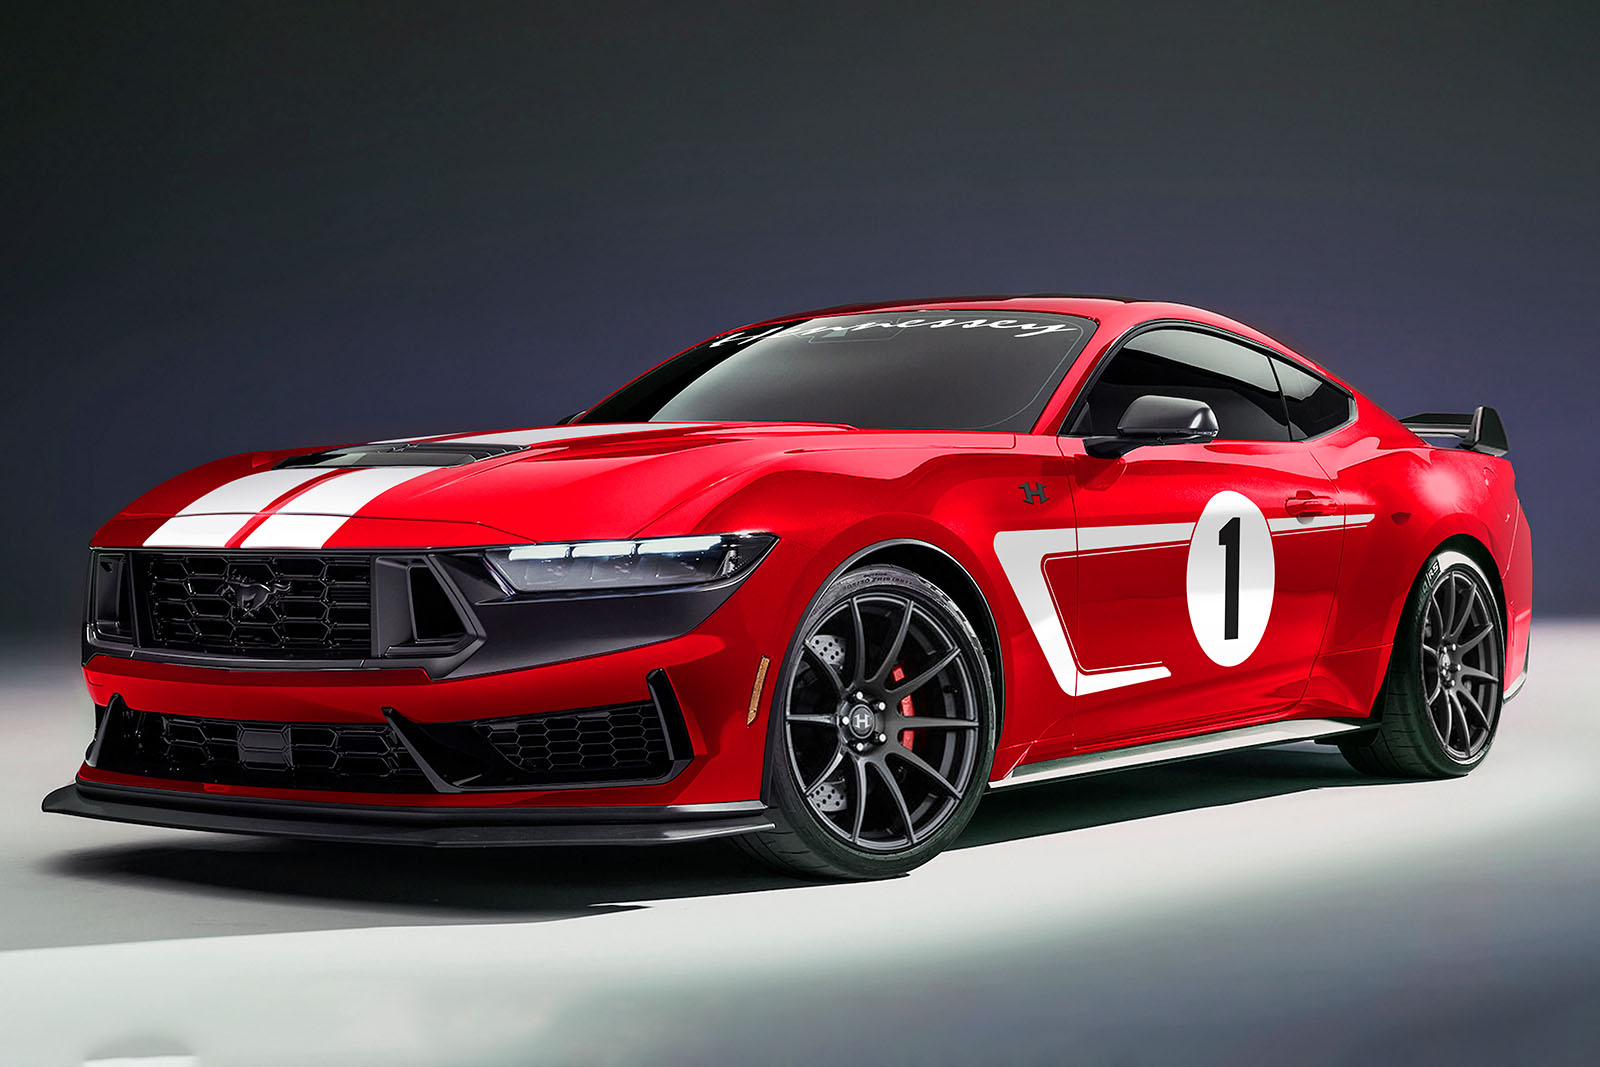 Hennessey H850 arrives as tuned Ford Mustang with 838bhp